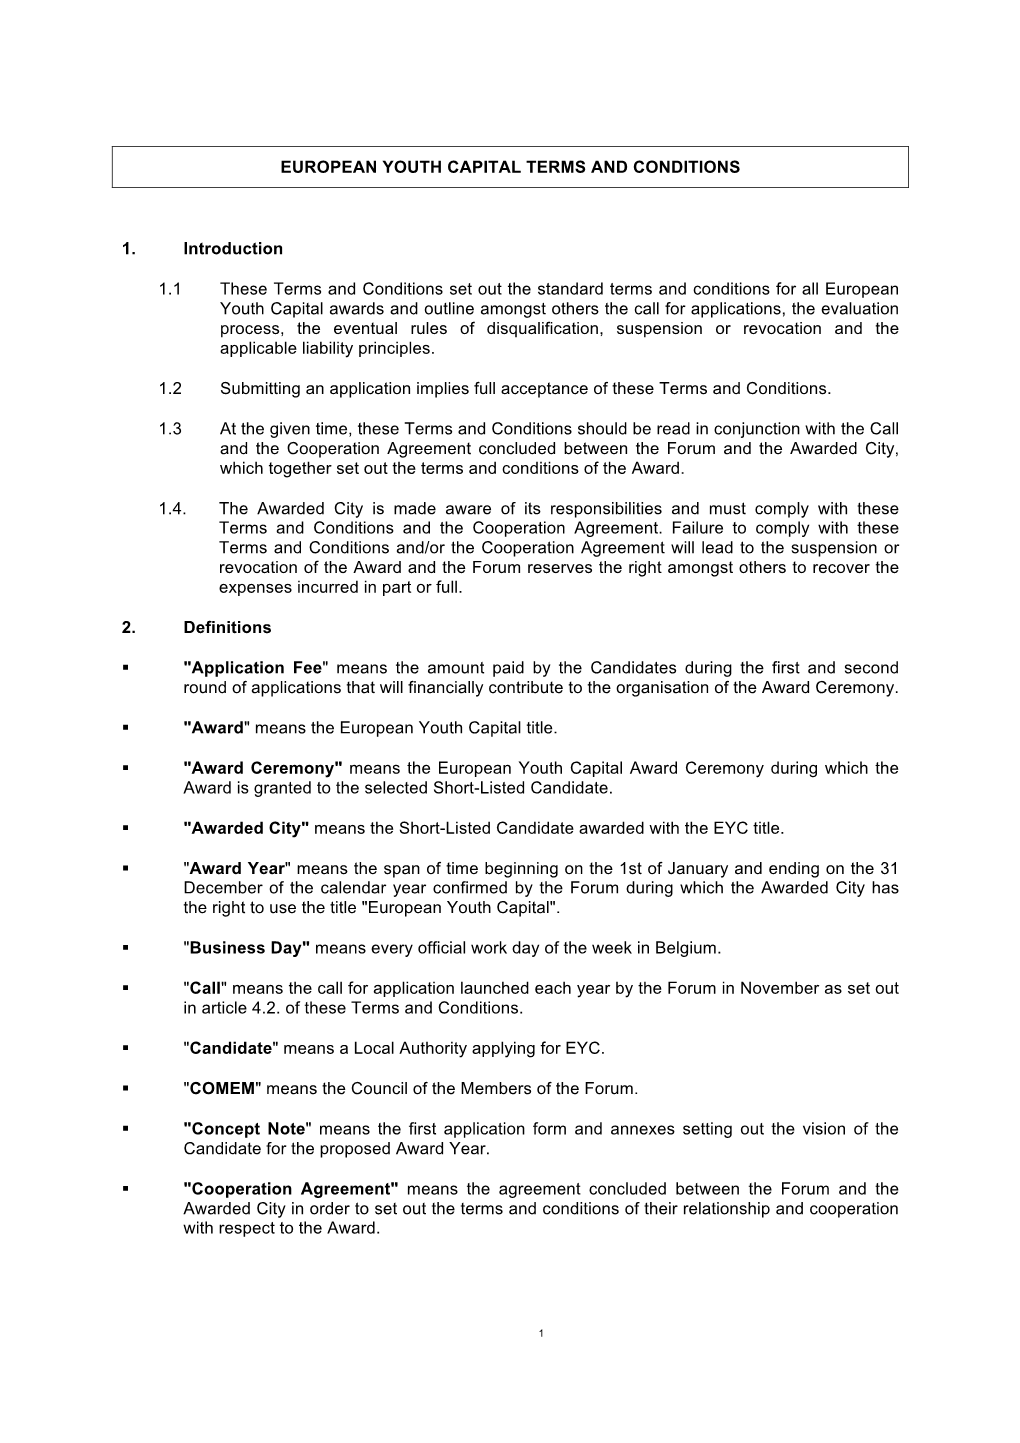 European Youth Capital Terms and Conditions 1